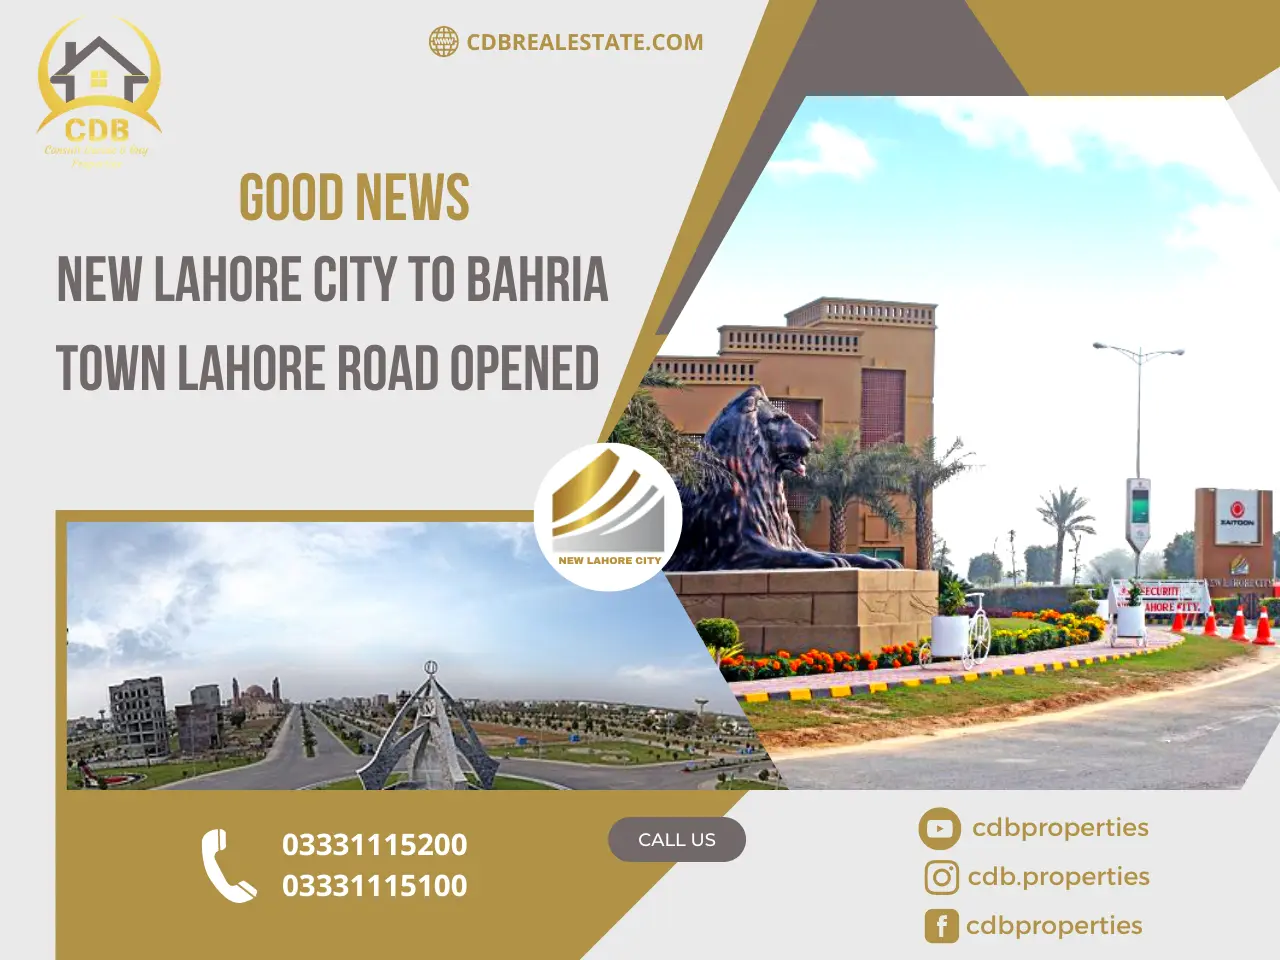 round about in bahria town and new Lahore city main entrance